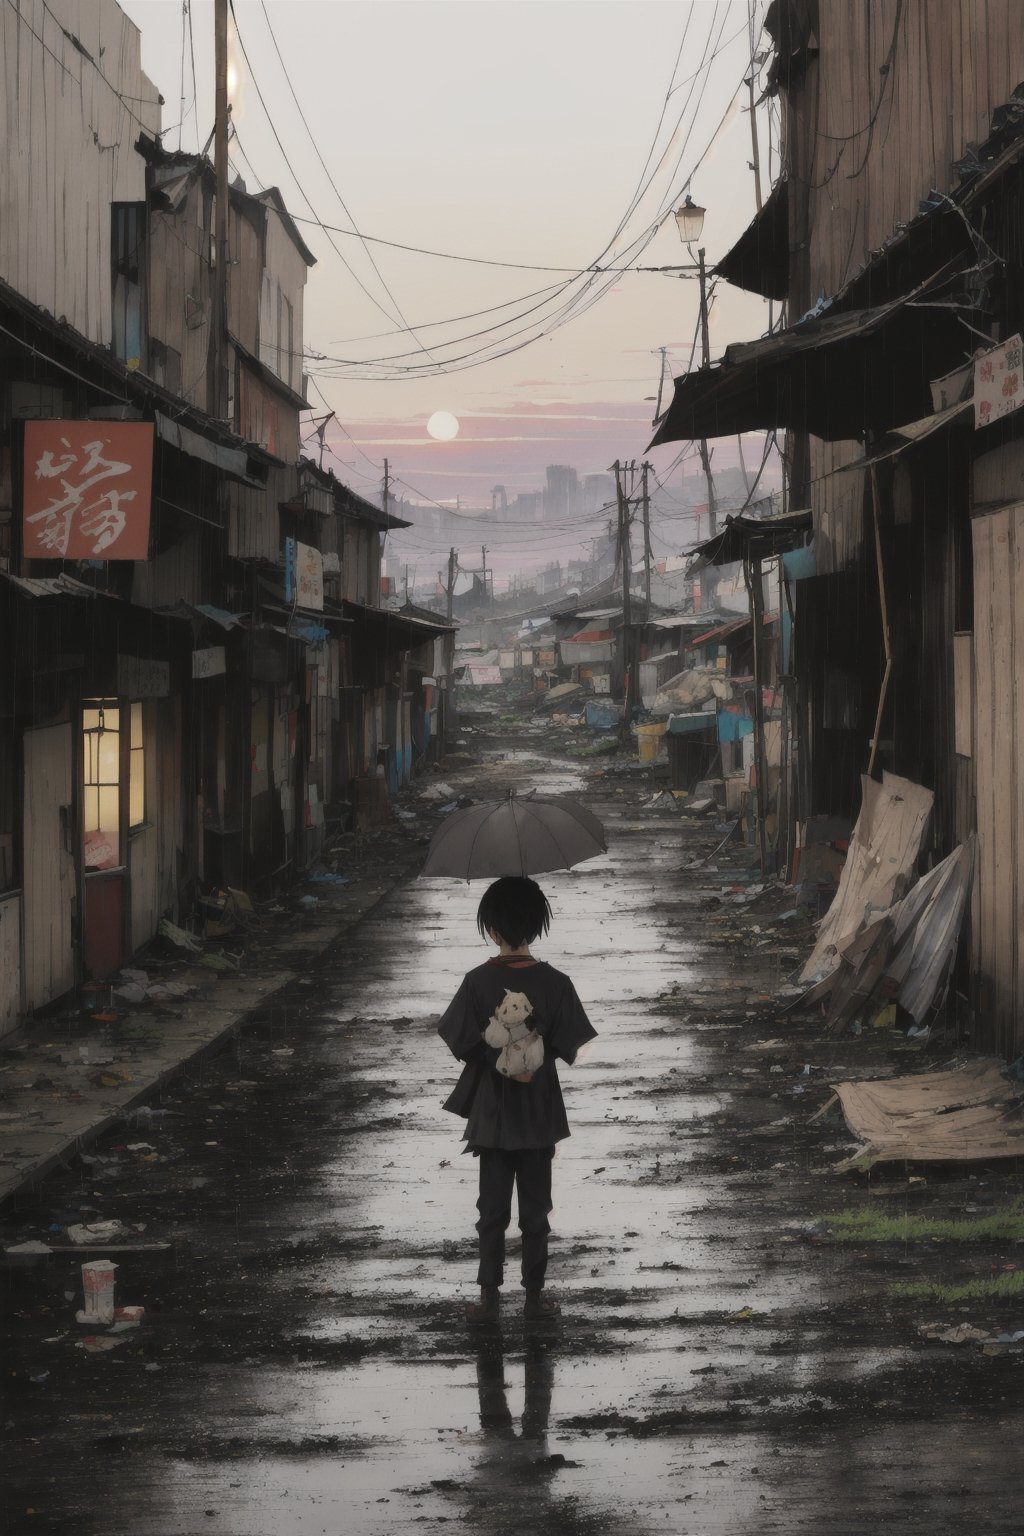 anime, best quality,  extremely detailed,  HD,  8k,  extremely intricate:1.3),  cinematic lighting,  dystopian world, japan,  The city is dilapidated and dirty, rainy sunset, A little girl stands praying,  in front of a ruined shrine, landscape, lake,((puppy)), ((dirty)), dirty dry skeleton lying on the side of the road, (( ripped clothes)), (( dirty on clothes)),